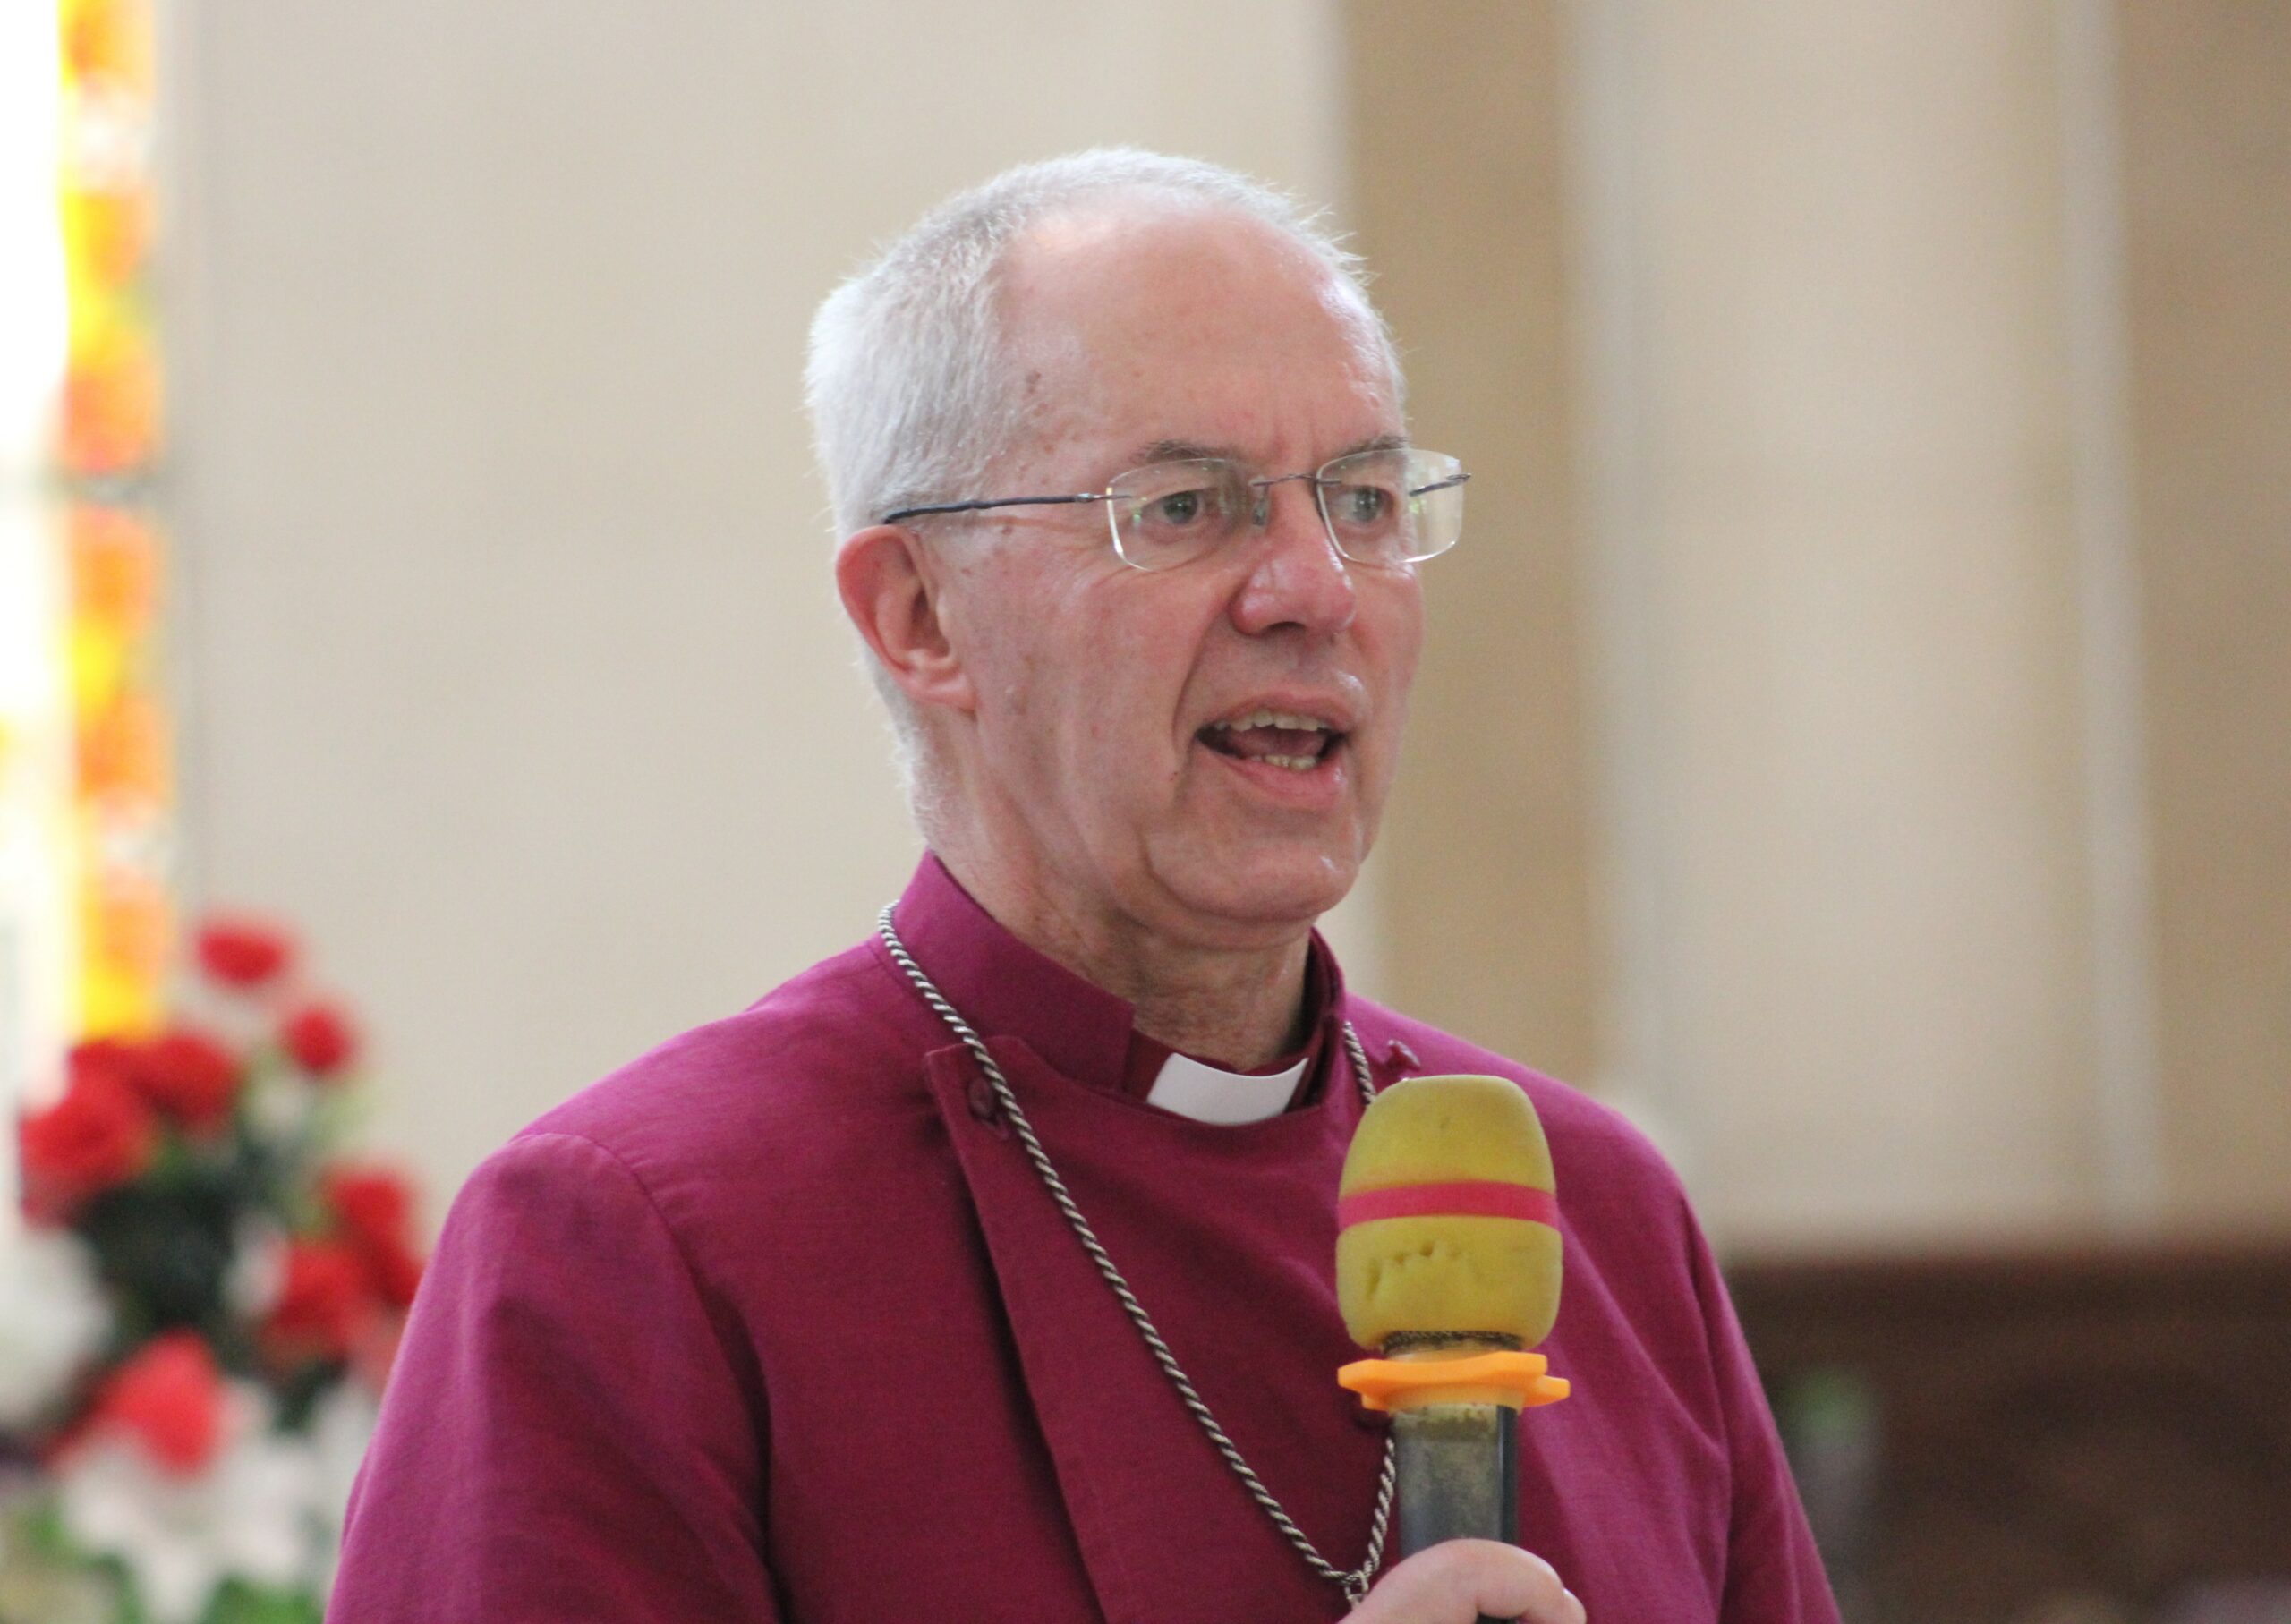 About 85% of Anglicans believe in traditional approach to marriage – Archbishop of Canterbury